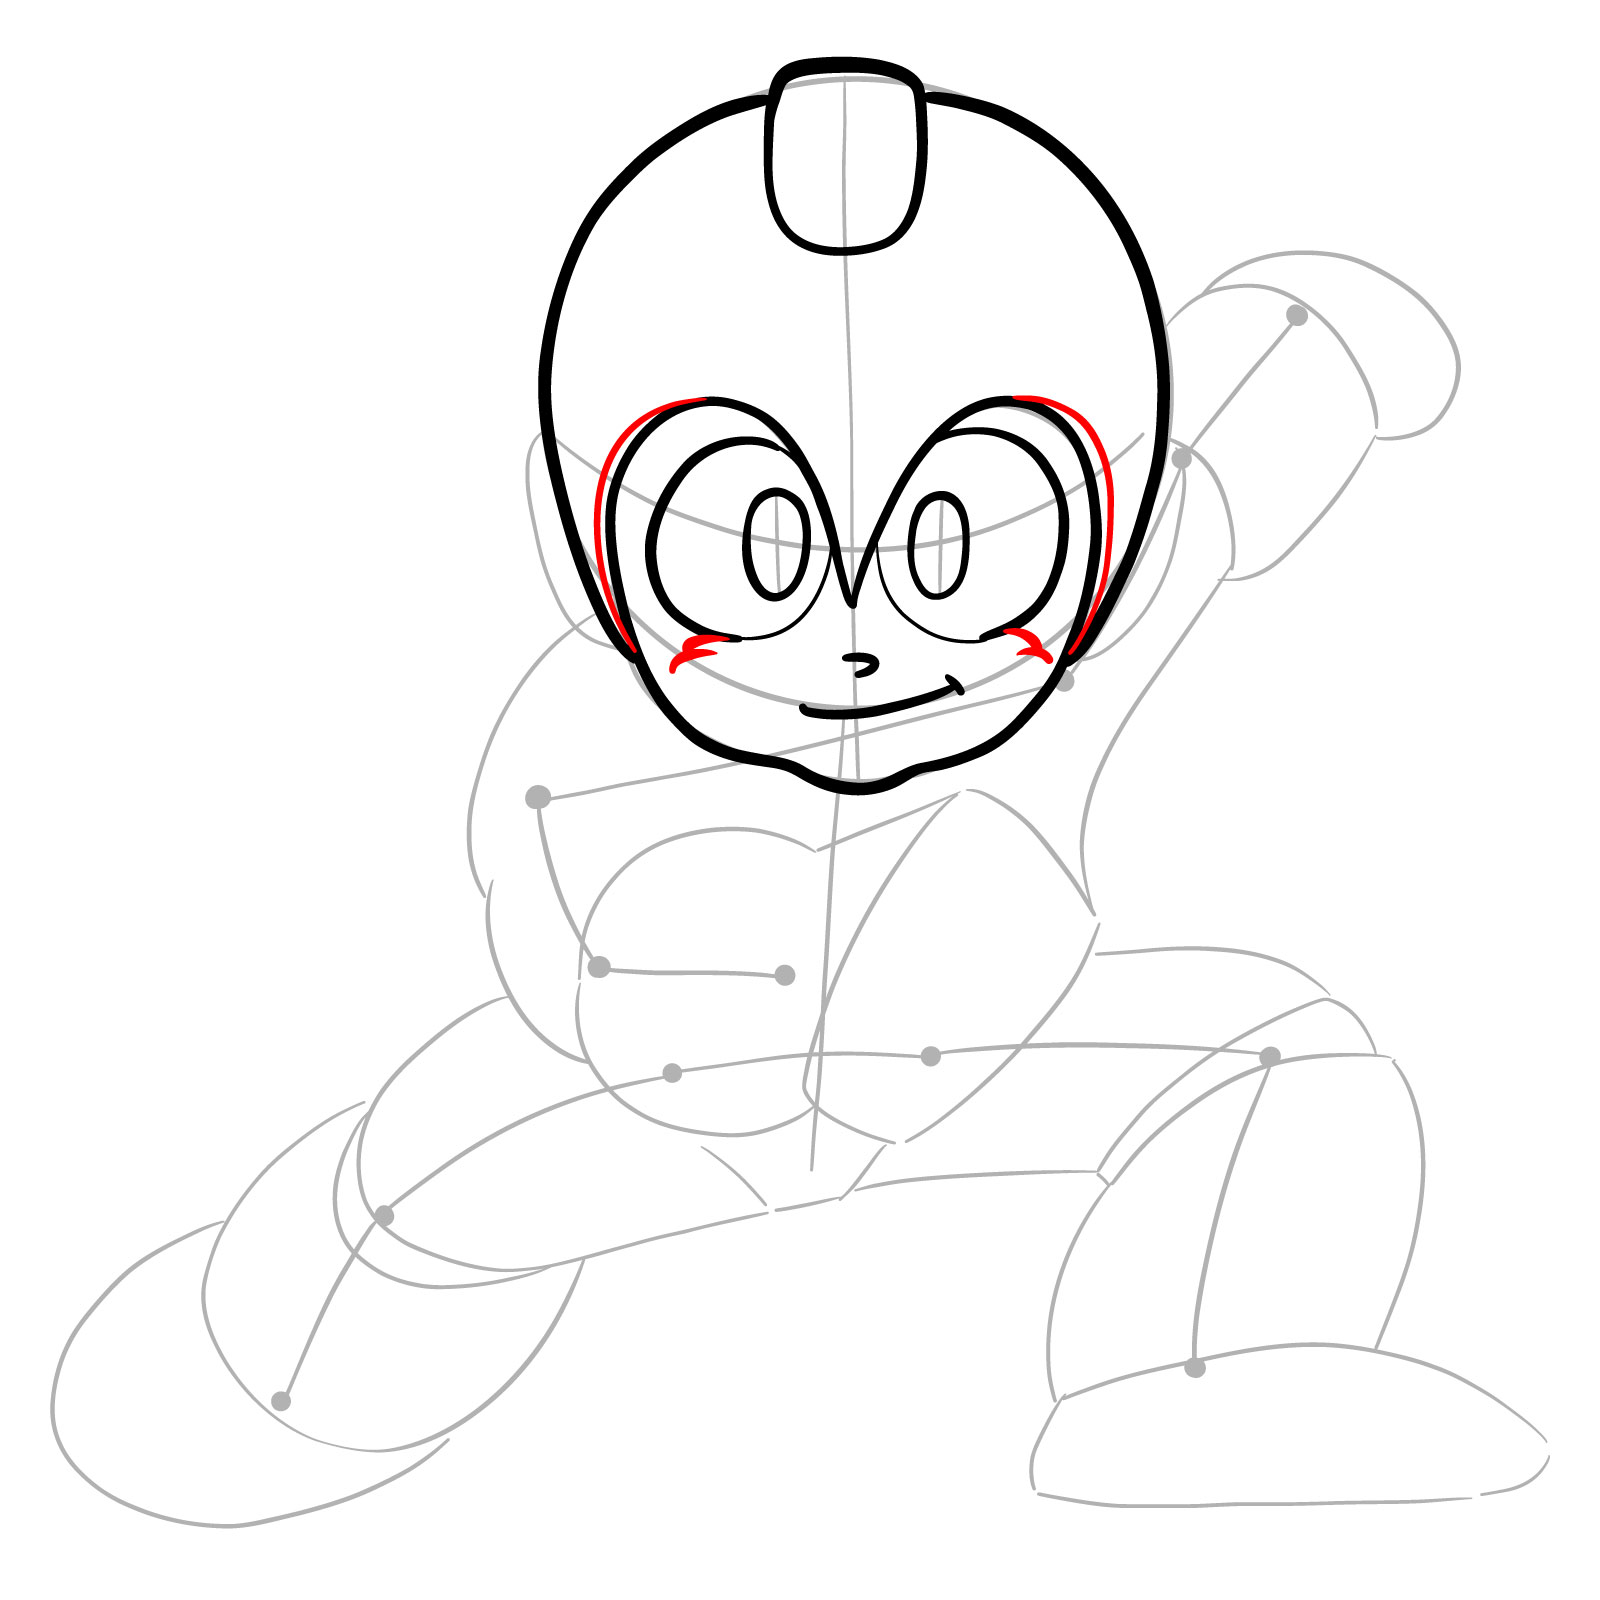 How to draw Mega Man from the original game - step 09